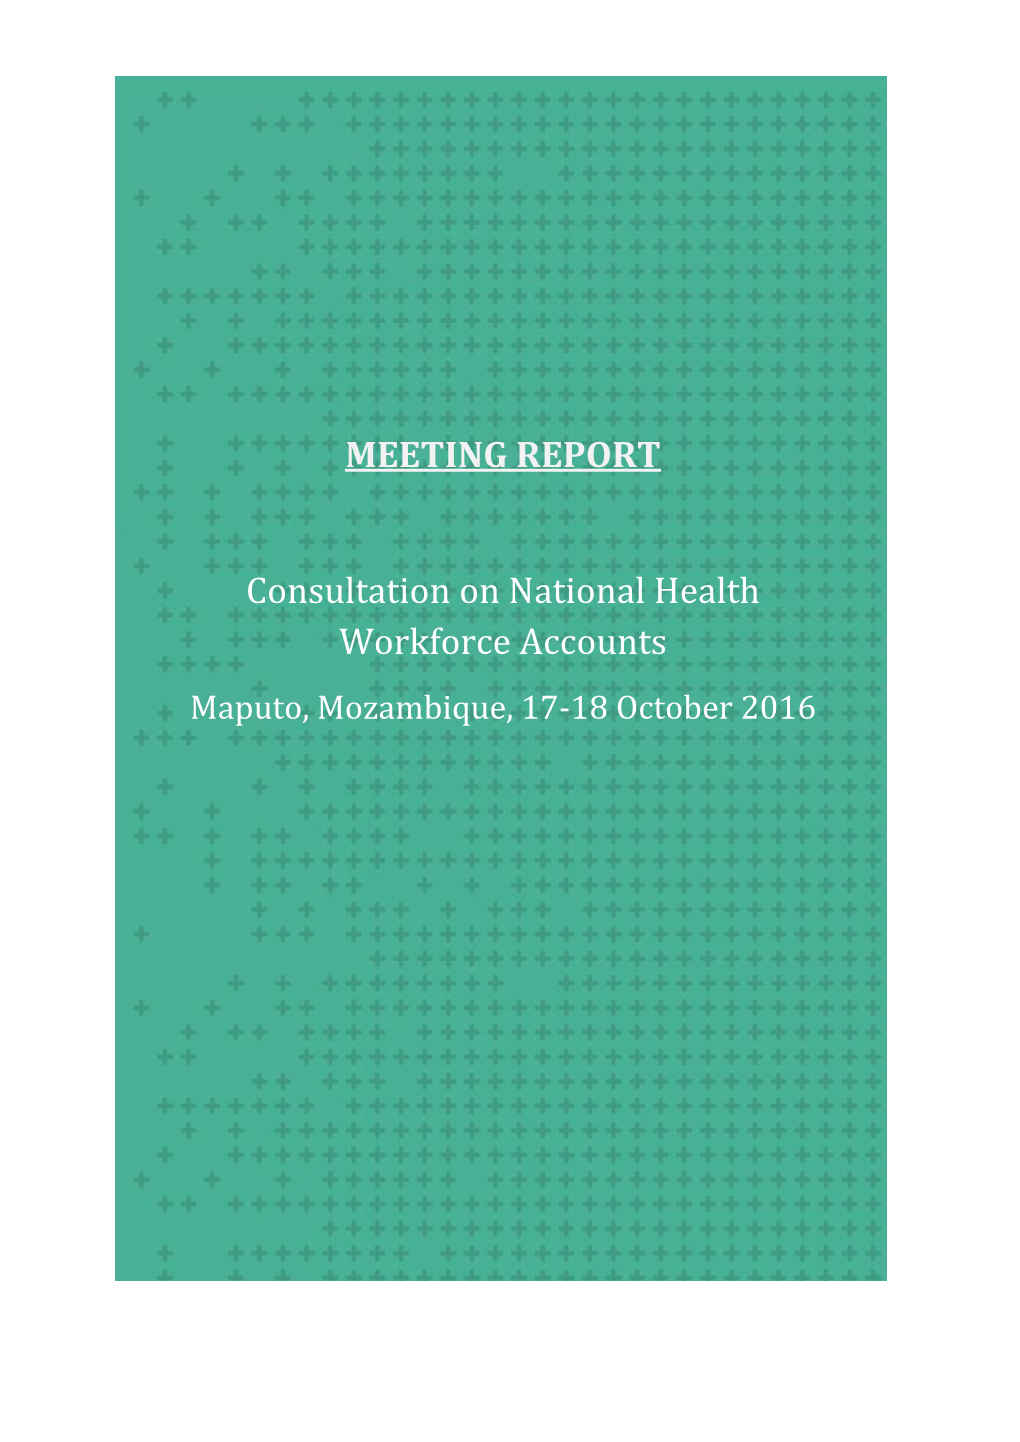 MEETING REPORT Consultation on National Health Workforce Accounts